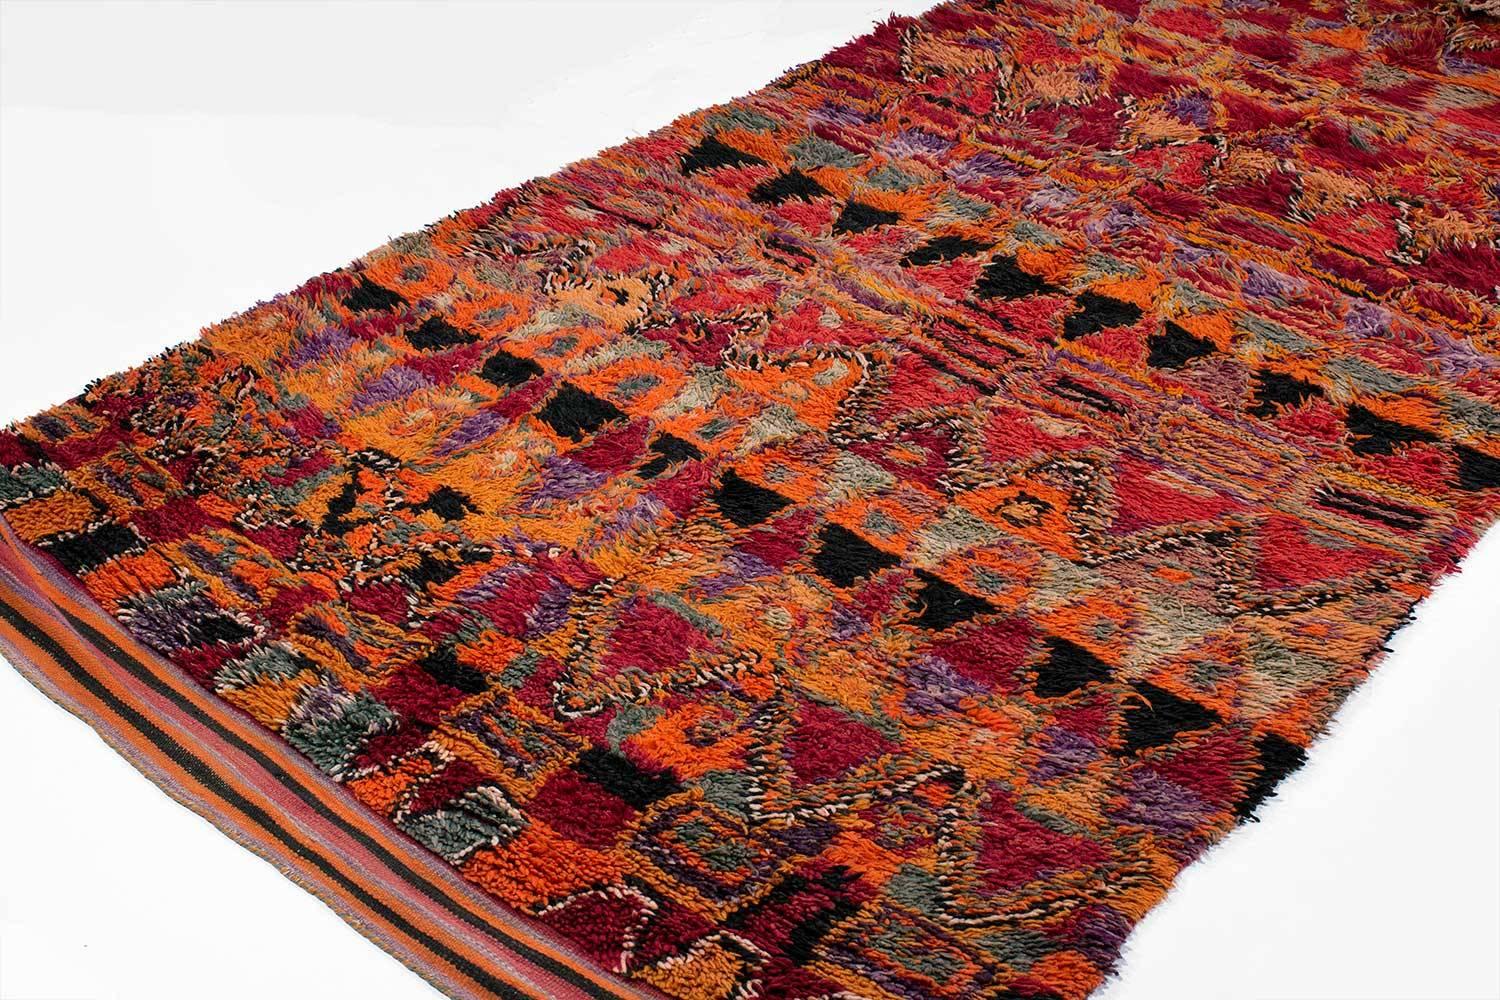 A beautiful vintage Berber rug from Morocco, probably woven in the 1970s and in excellent condition. This rug had thick, lustrous wool pile and exceptional colors. Holds wonderful color variations and irregular geometric. 